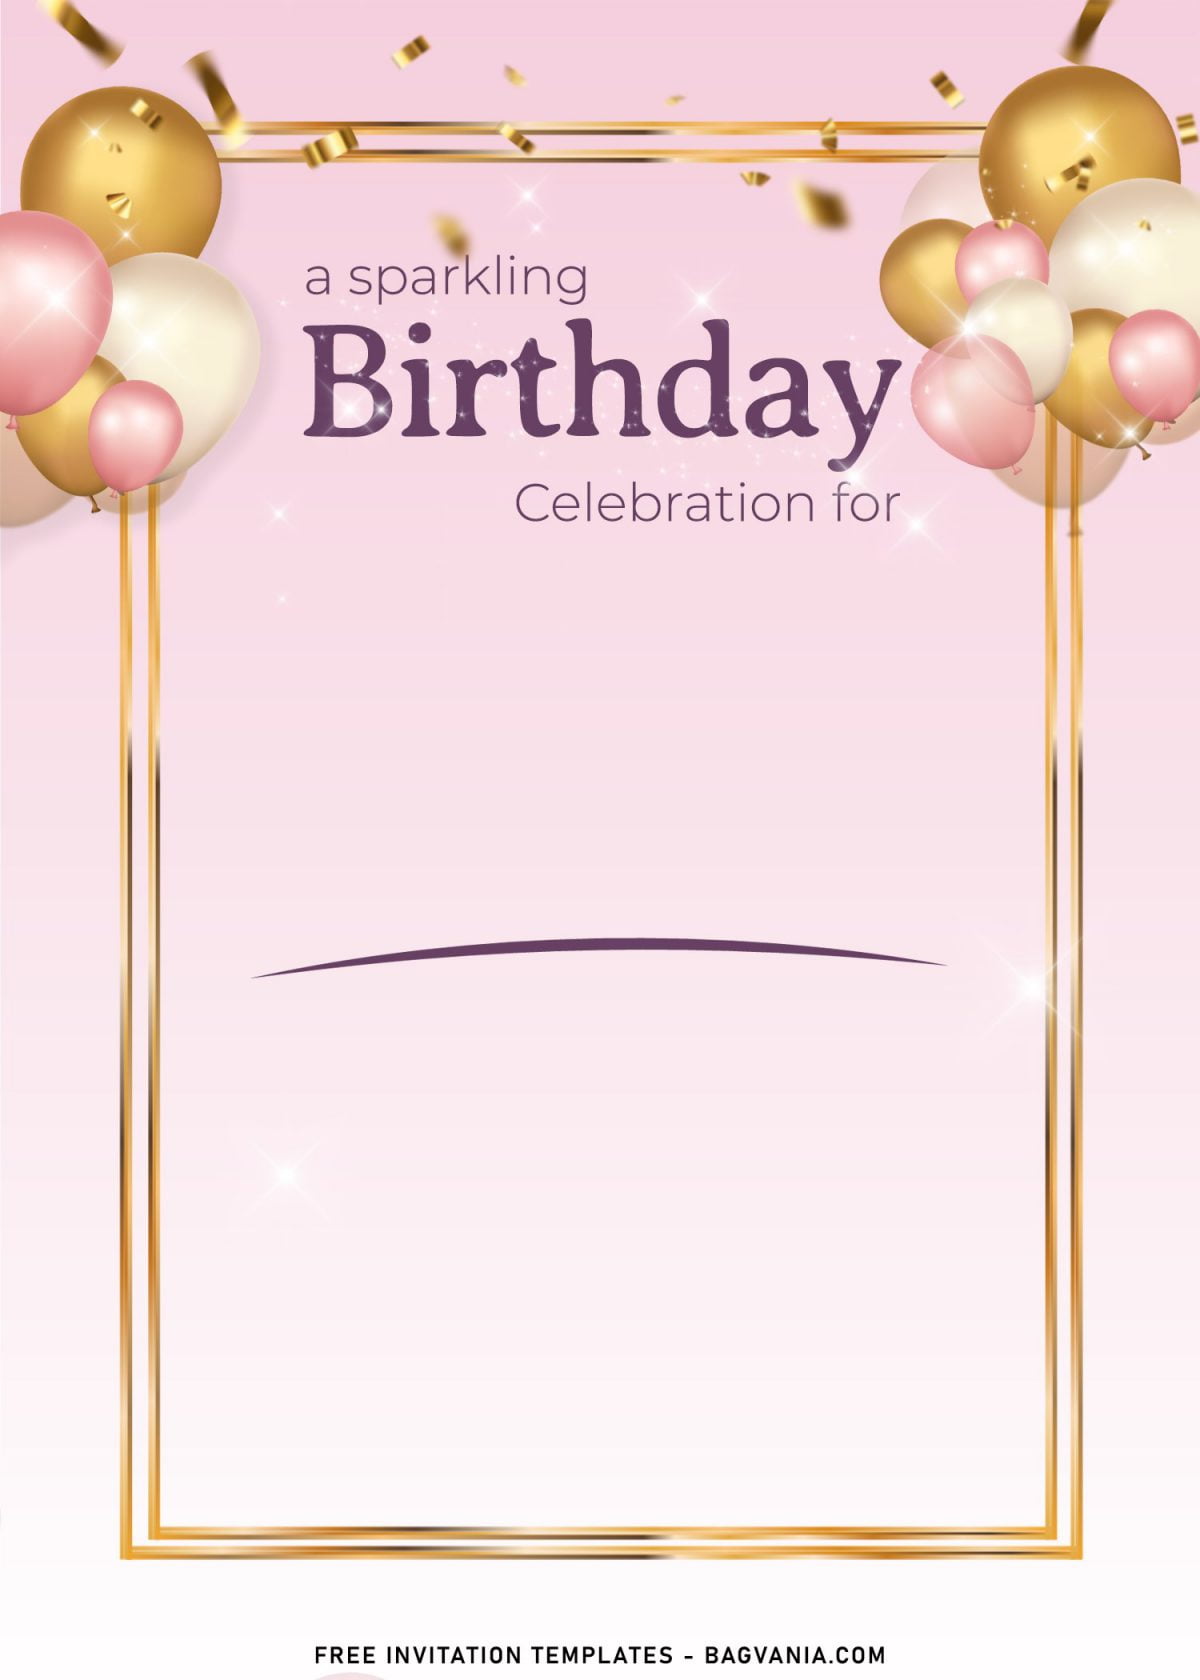 10+ Sparkling Balloons Birthday Invitation Templates Suitable For All Ages with sparkling gold balloons